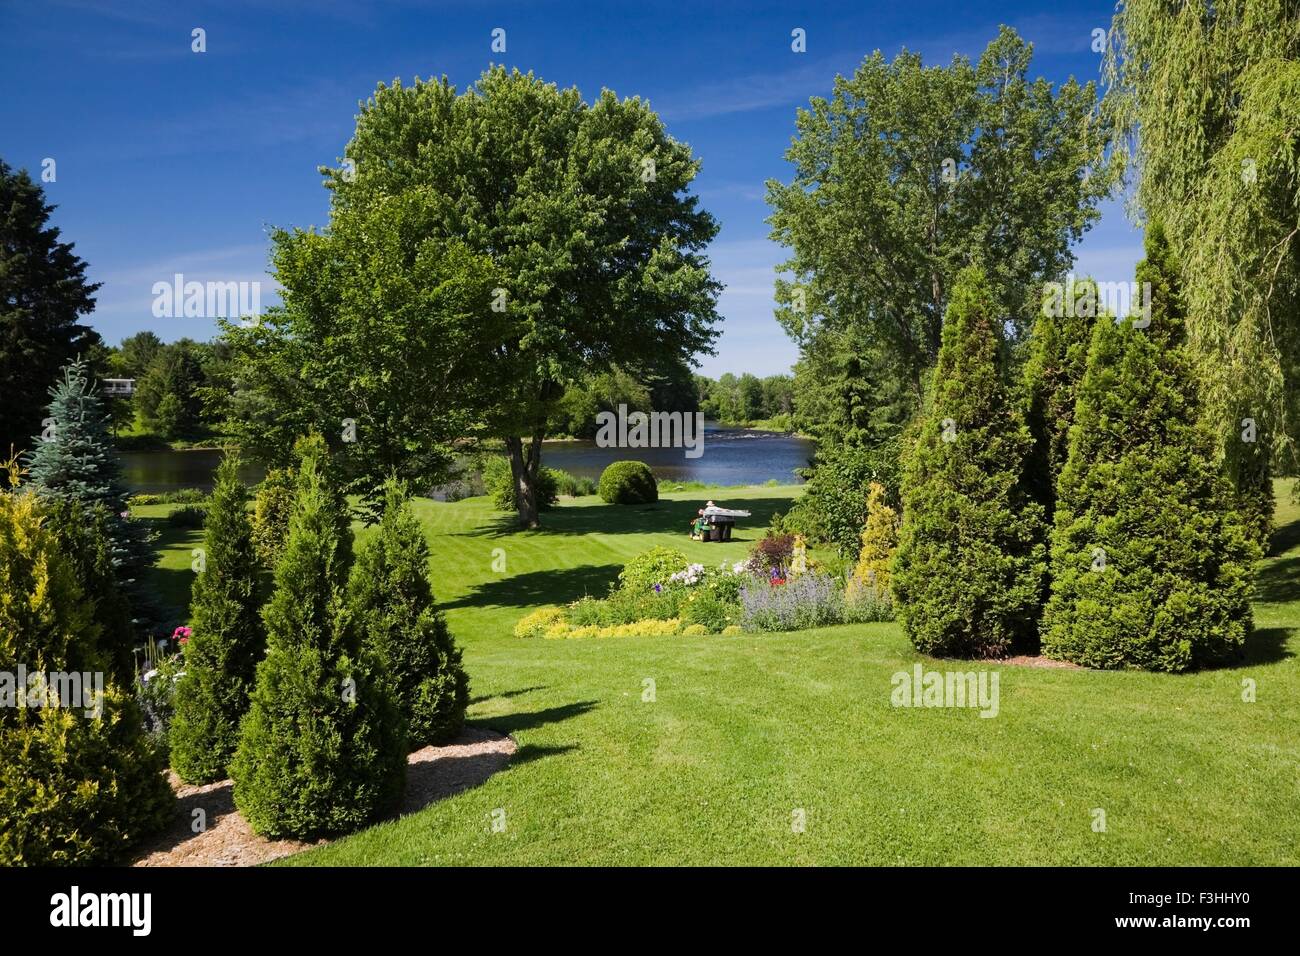 View of the Ouareau river in garden with lawns and Cedar trees (thuja occidentalis) in spring season, Quebec, Canada Stock Photo